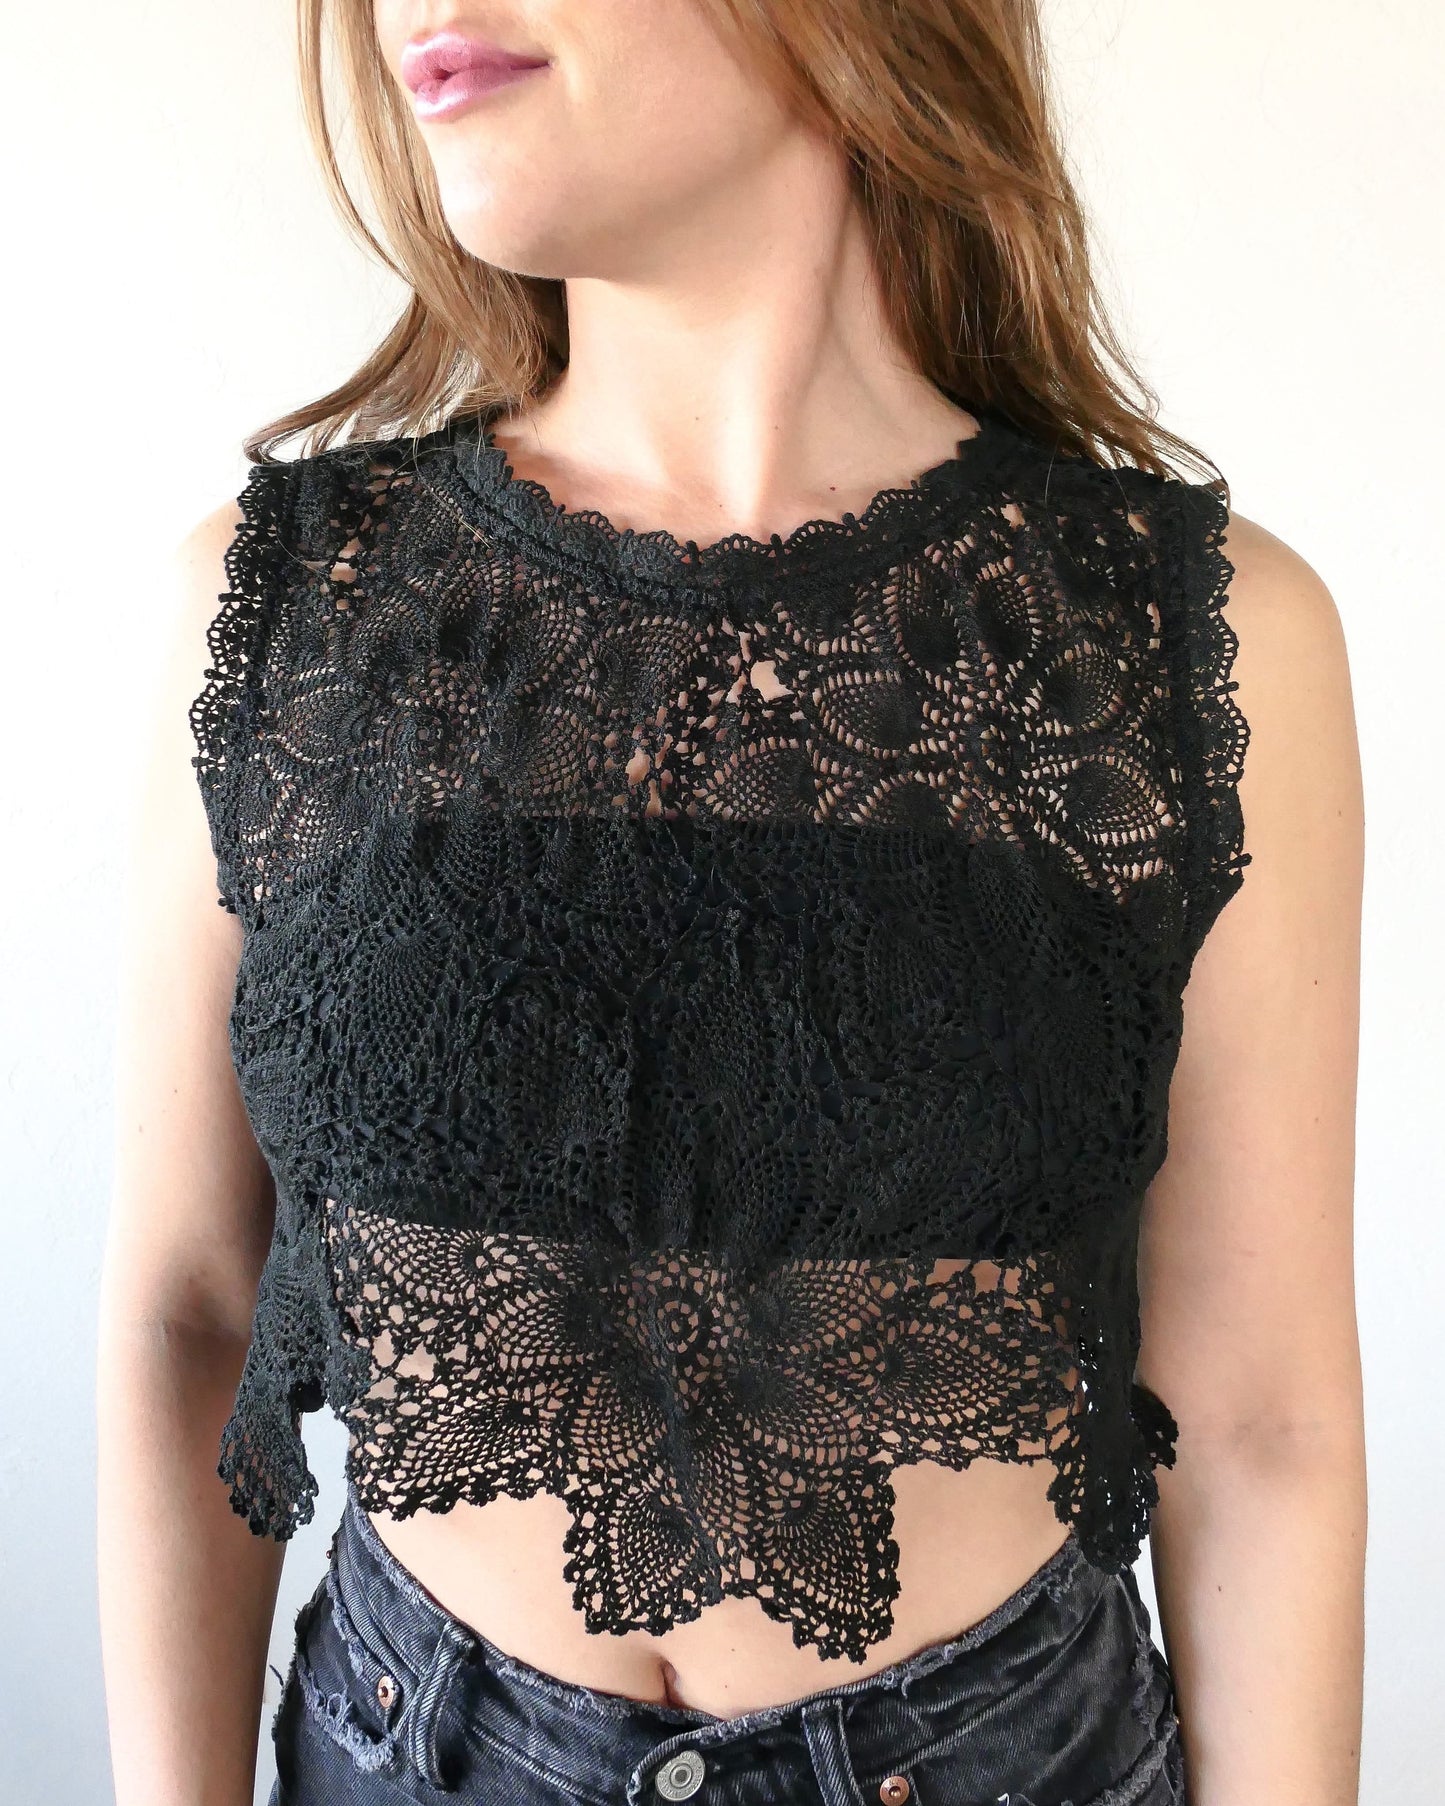 An ultra casual, hip, and boho-chic crop tank top made with interconnected flower doilies reminiscent of the white lotus, which symbolizes peace, tranquility, and calmness. Lace trim at the collar and sleeve. Model is wearing a black colored crochet Lim's Vintage top.